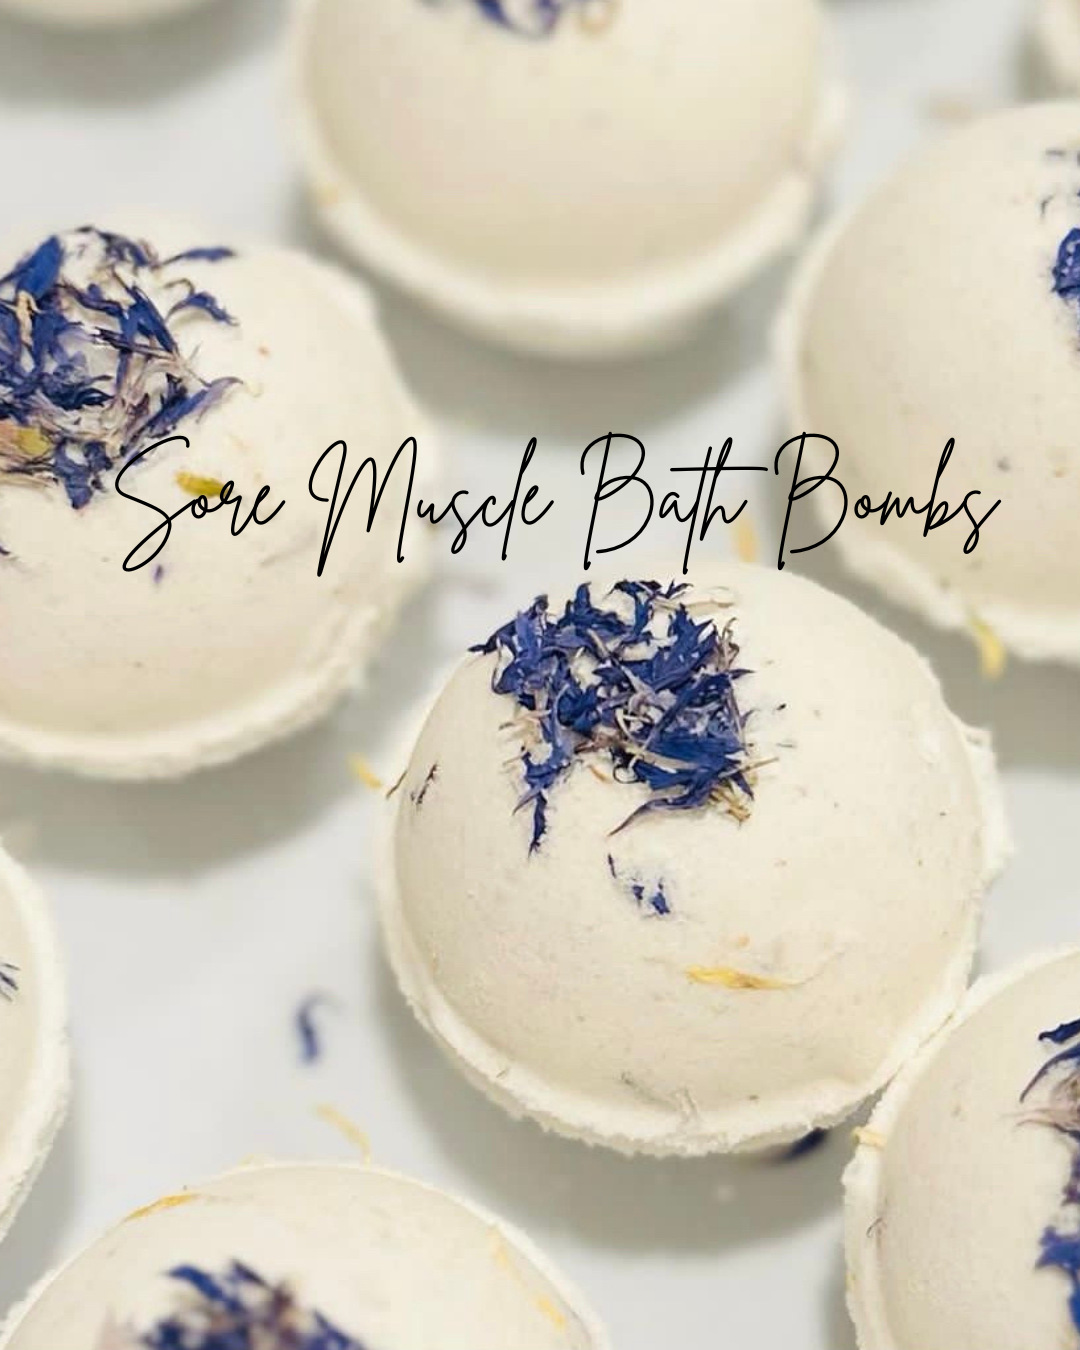 Sore Muscle Relief Bath Bombs